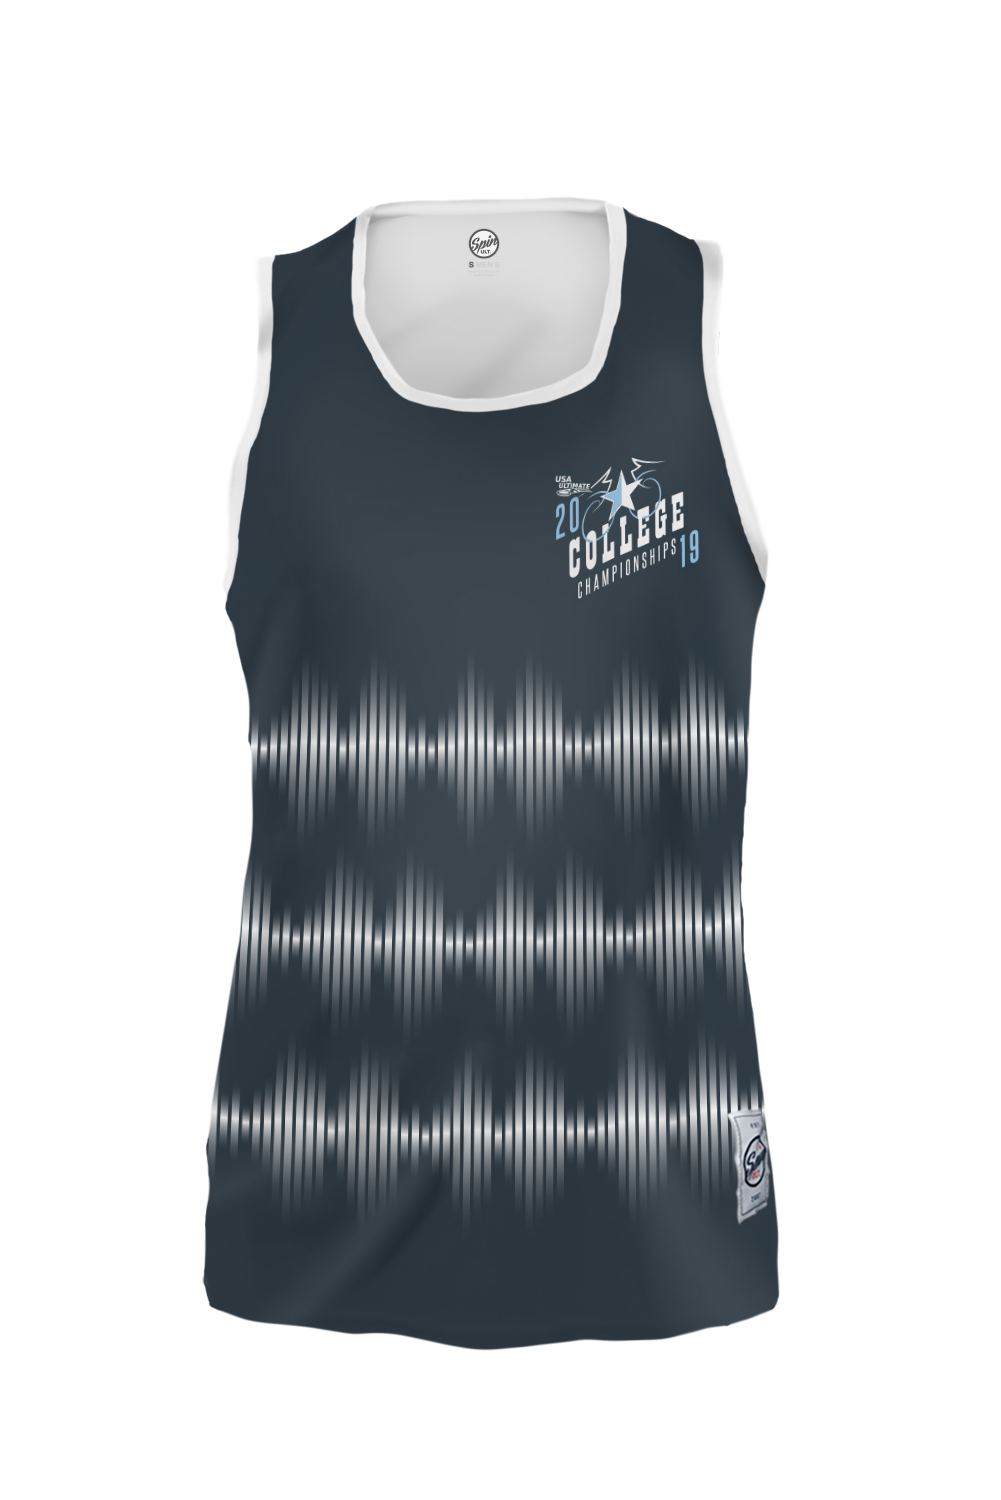 College Championships 2019 Sound Waves Tank